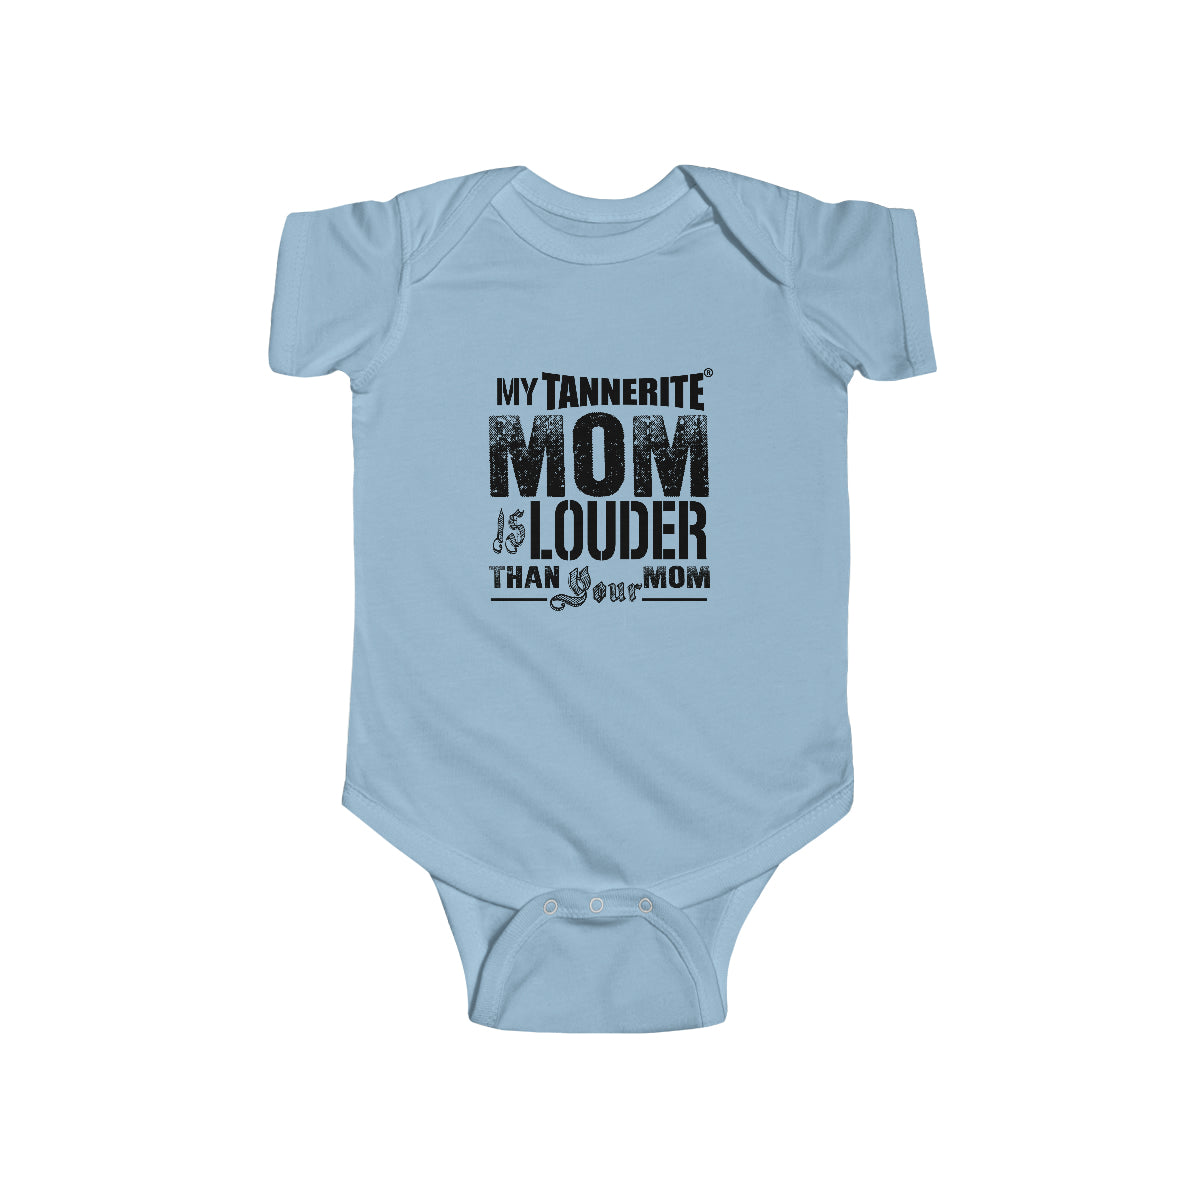 My Tannerite® Mom is Louder Than Your Mom - Infant Fine Jersey Bodysuit